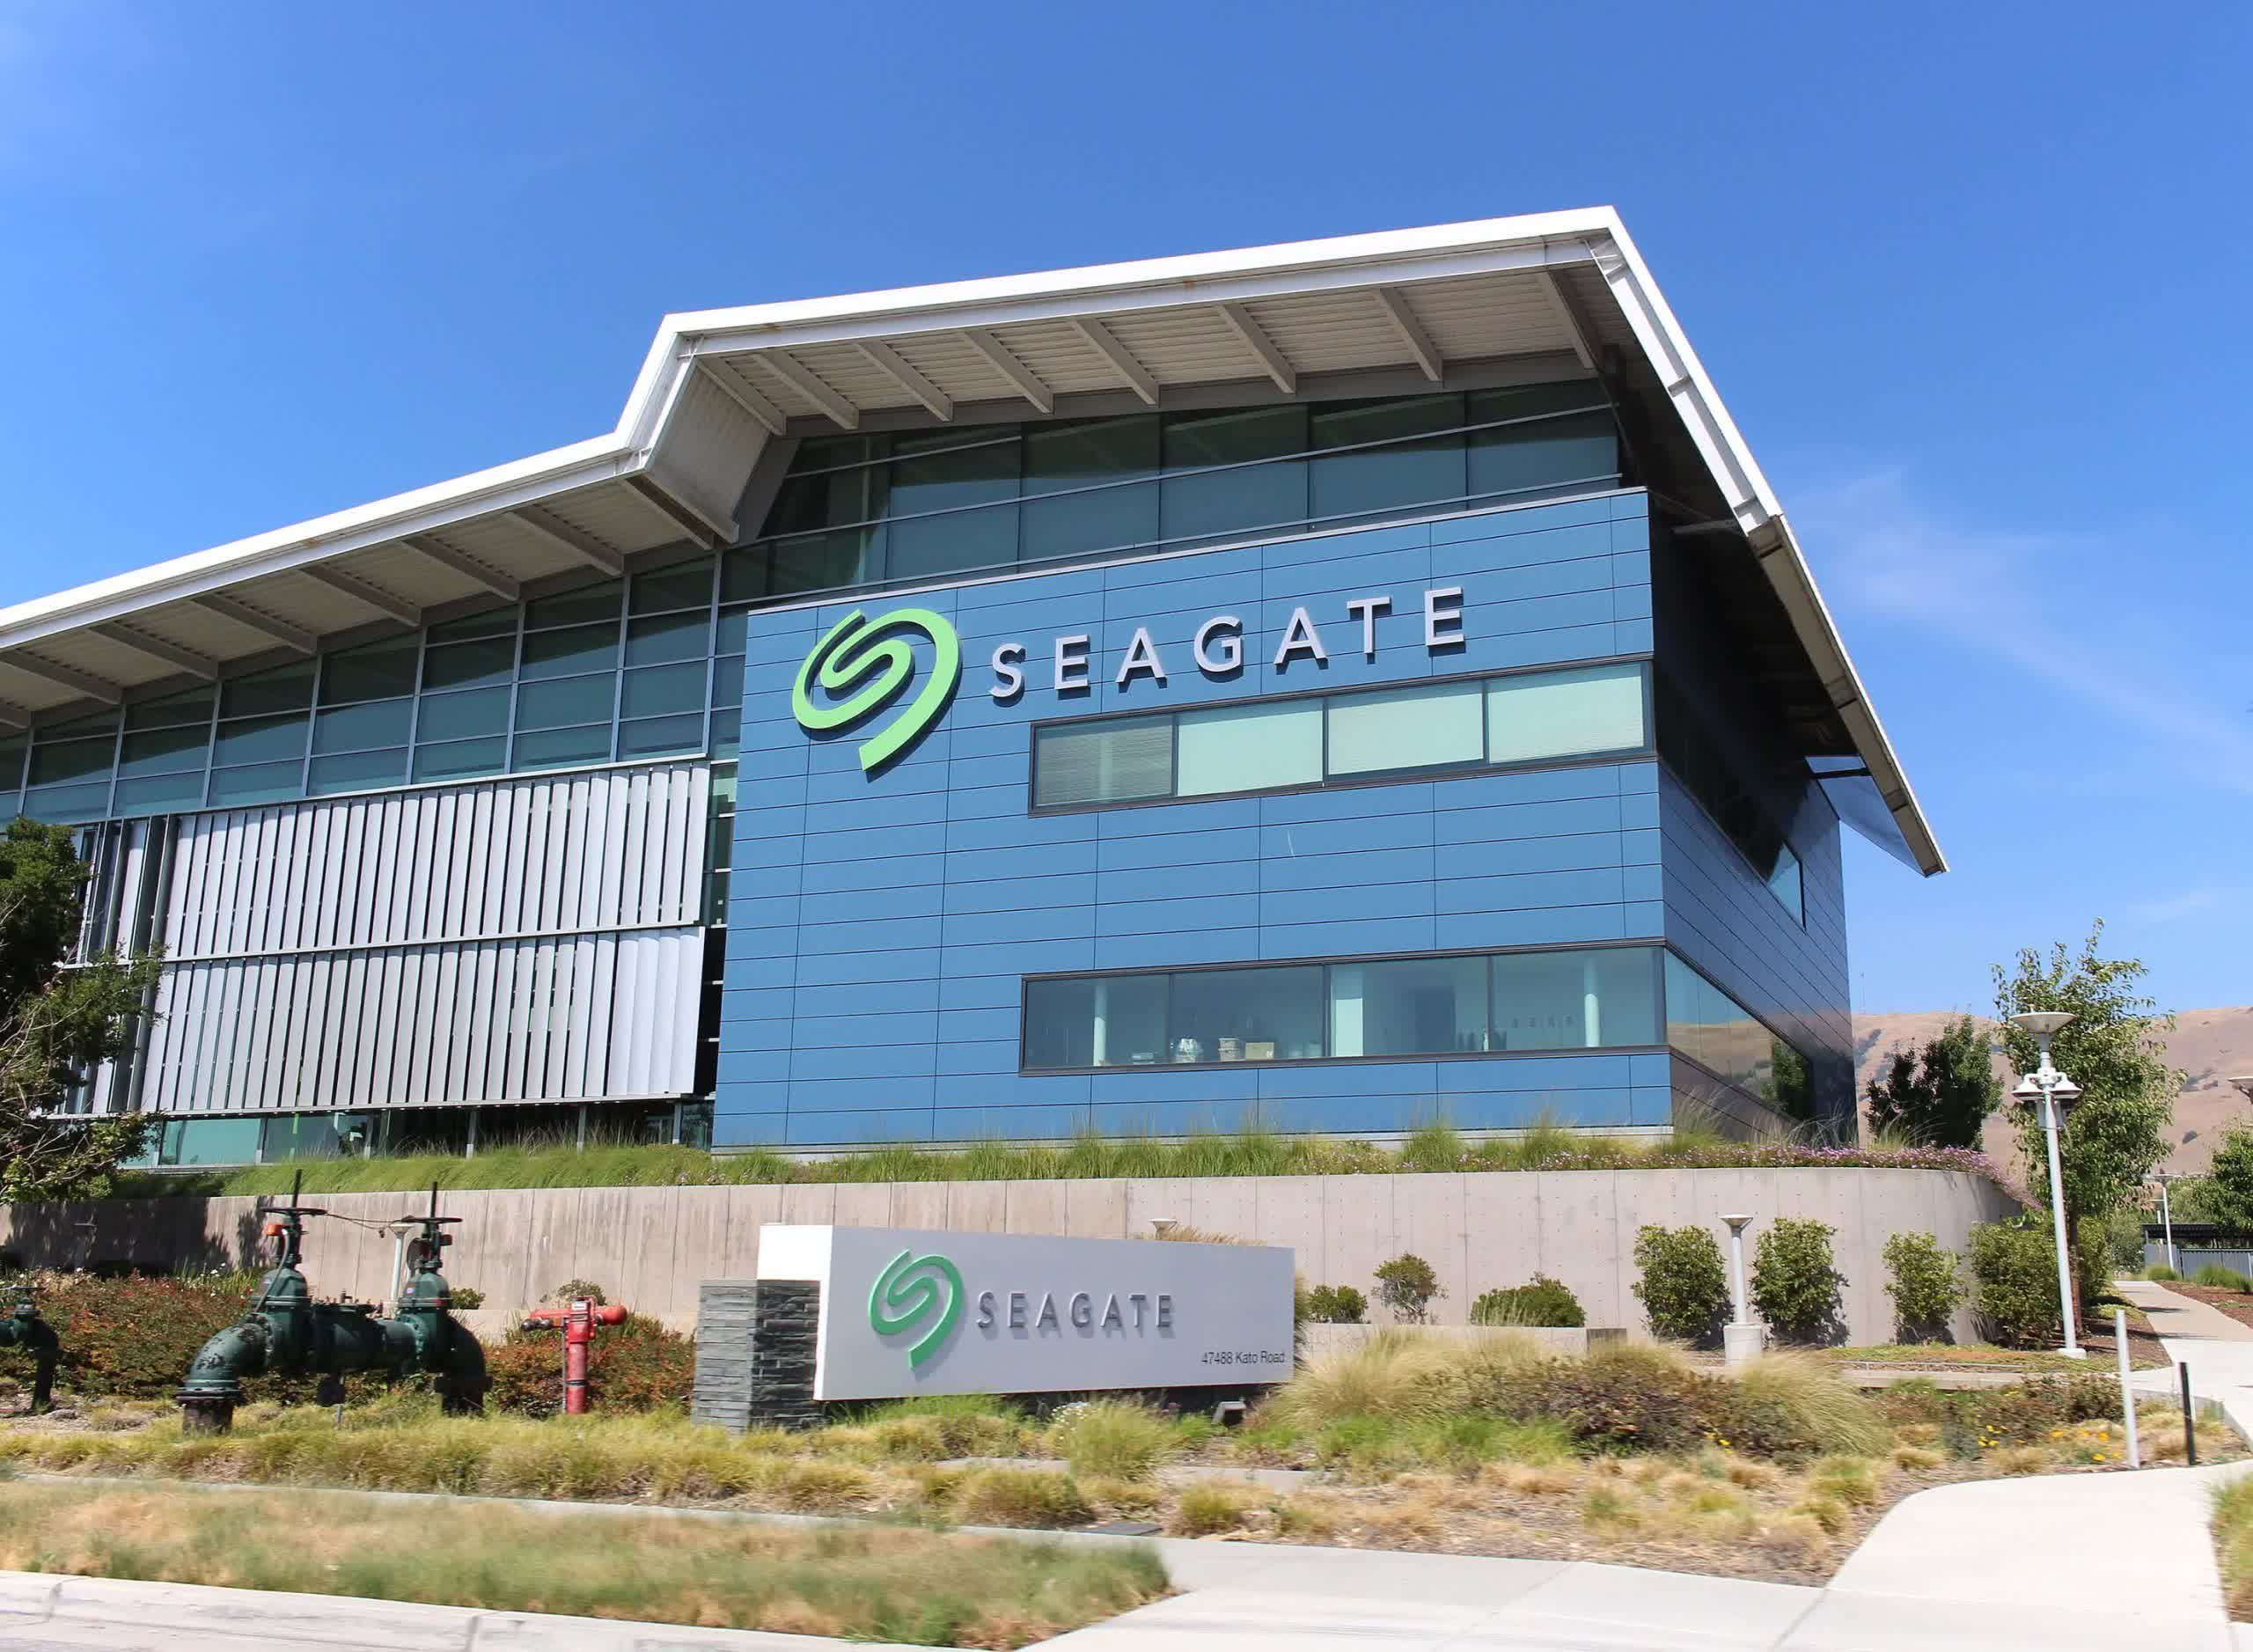 Seagate reduces carbon footprint with refurbished storage drives